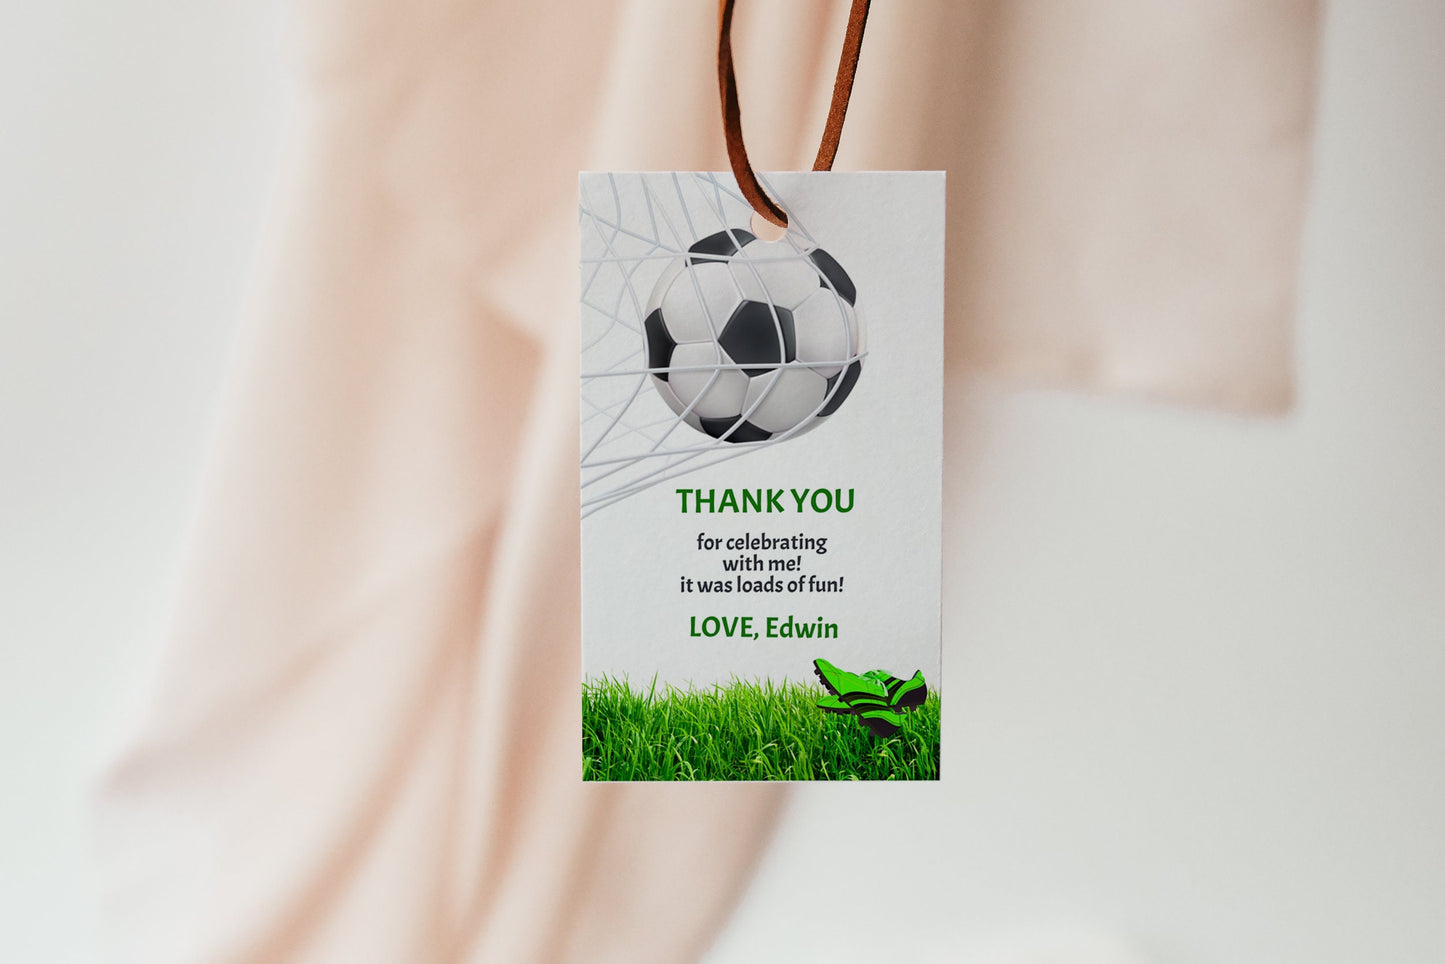 Editable Soccer Electronic Invitation Template SS